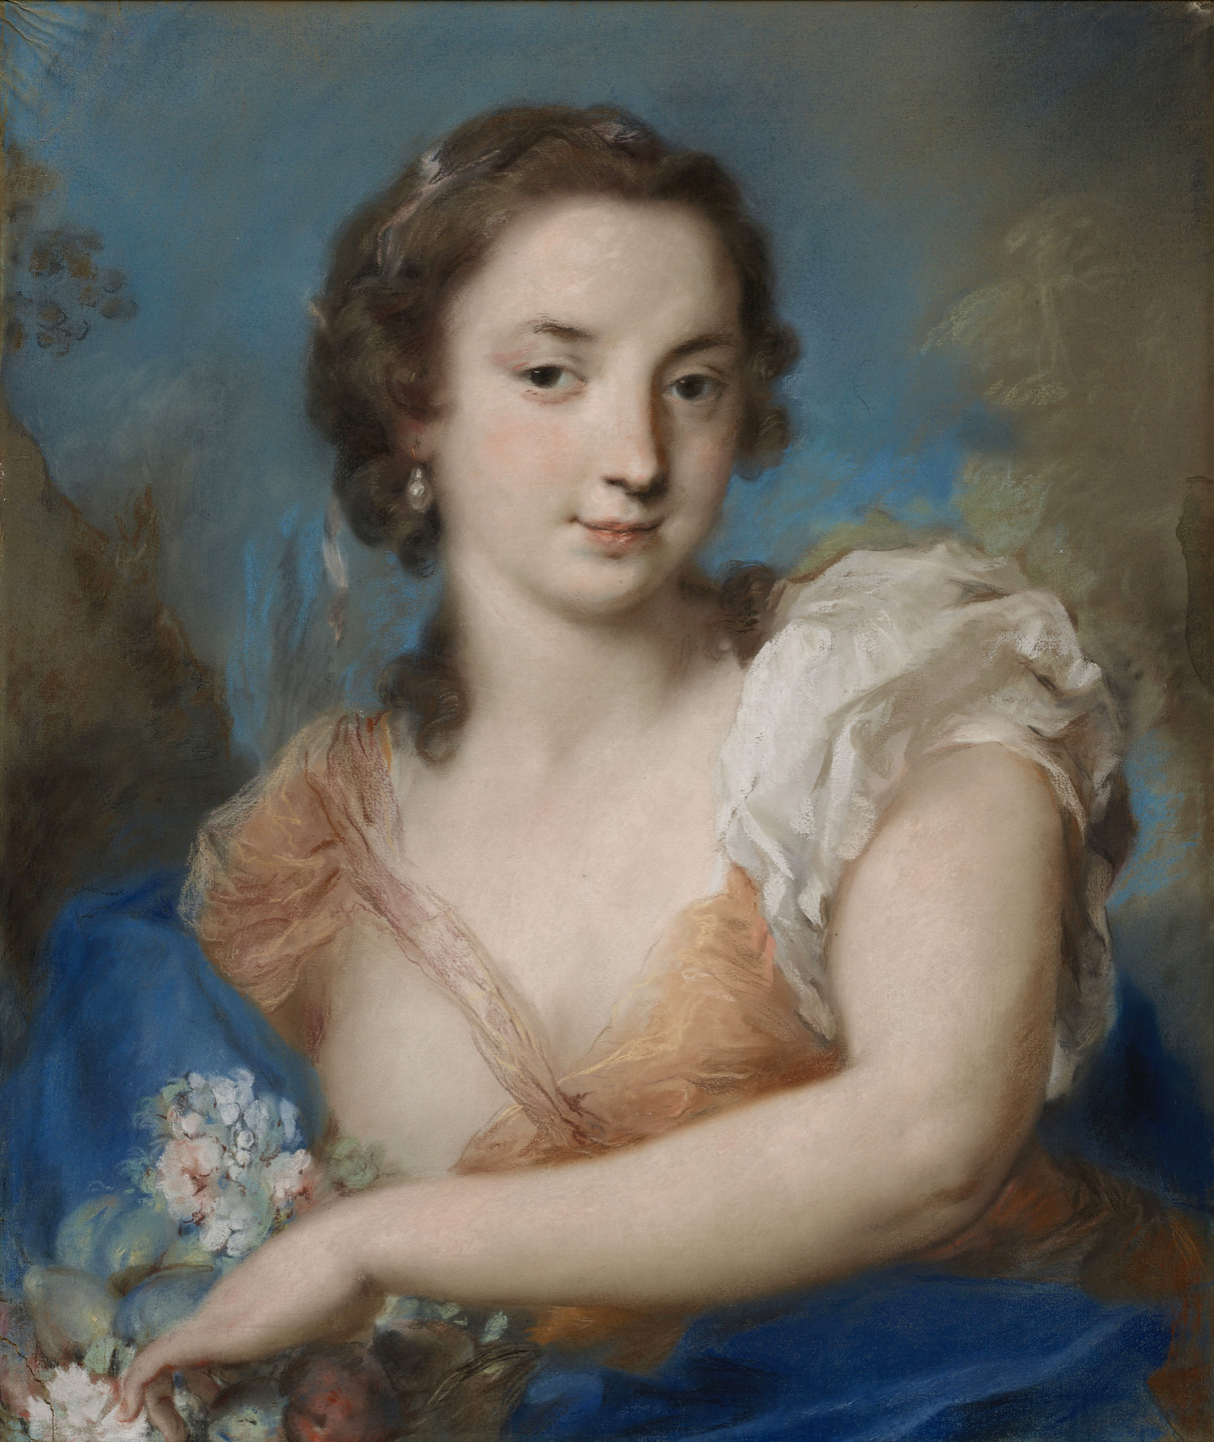 Rosalba Giovanna Carriera, "A Personification of Summer," c.1744, pastel on blue paper, 59.8 x 50.1 cm, Royal Collection Trust, UK